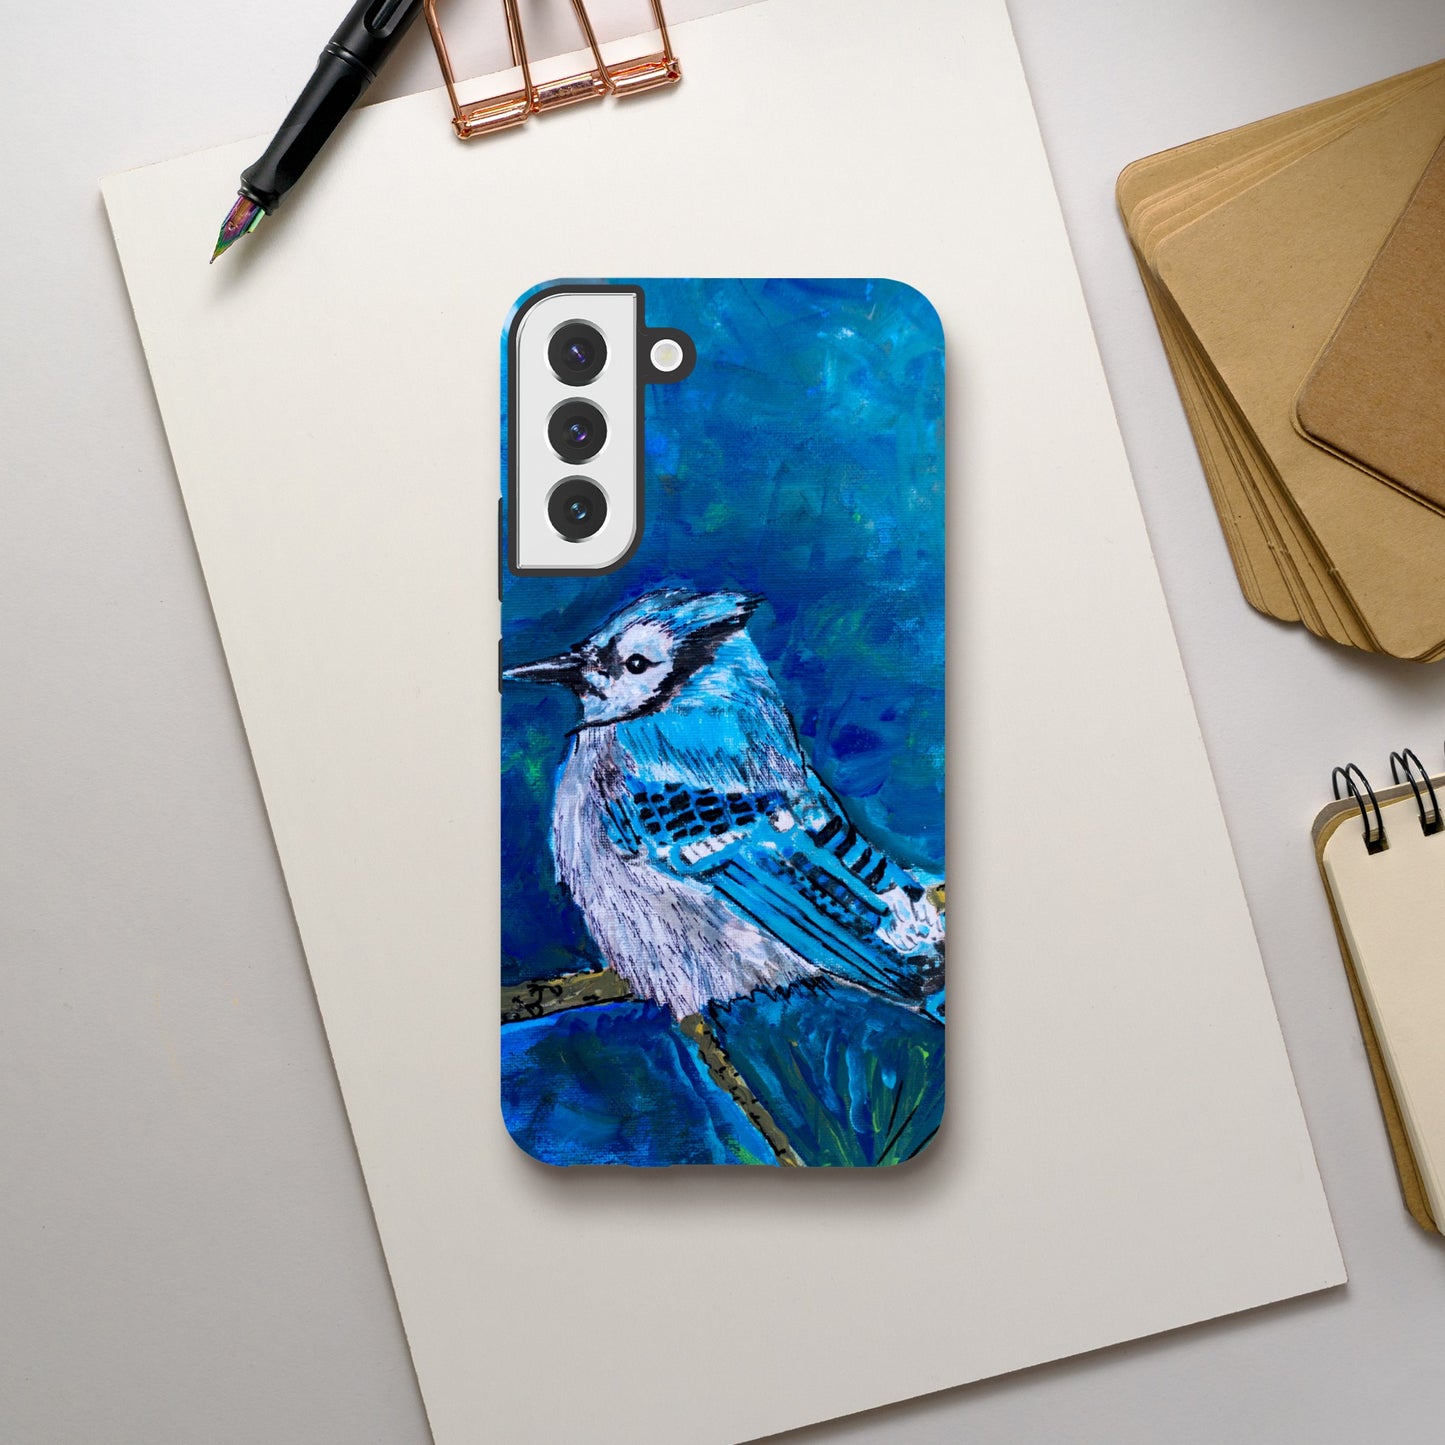 Blue Jay #1 - Phone cases